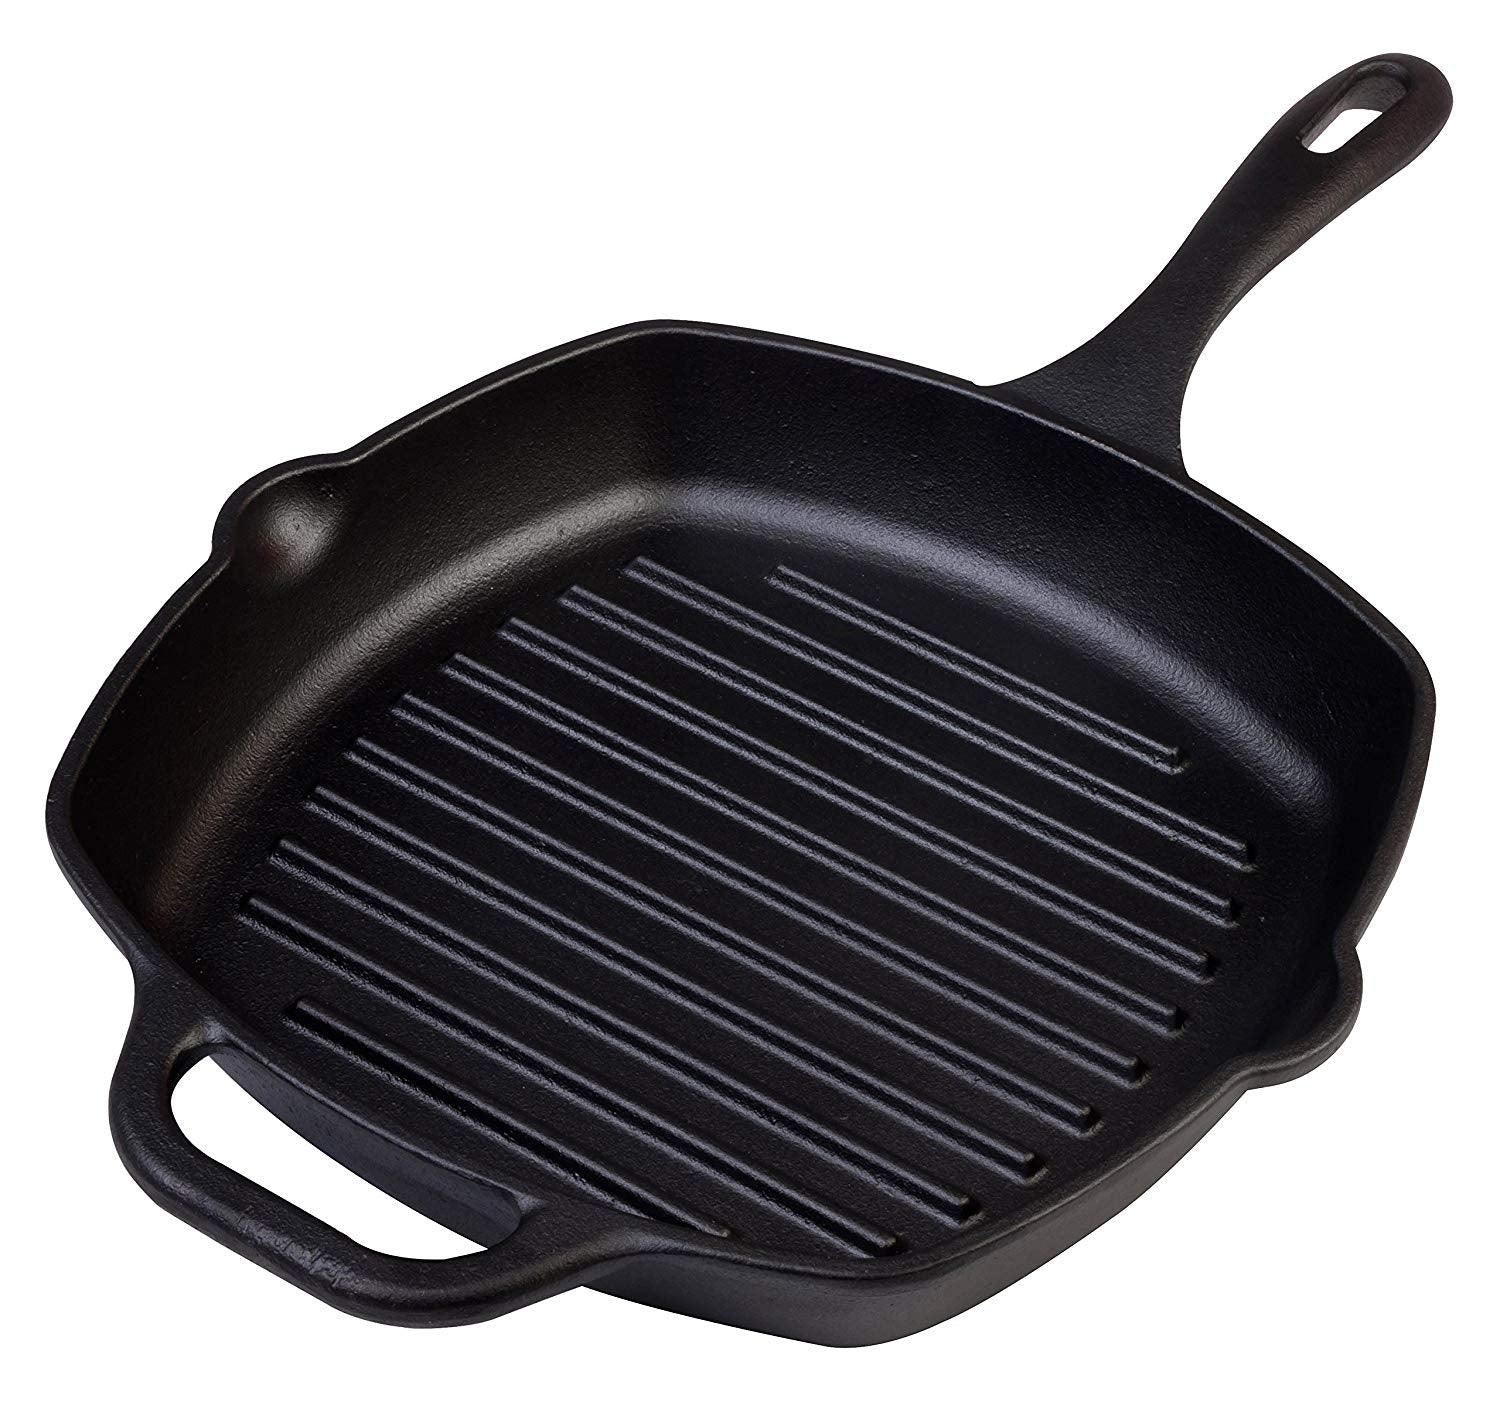 10 Cast Iron Square Grill Pan